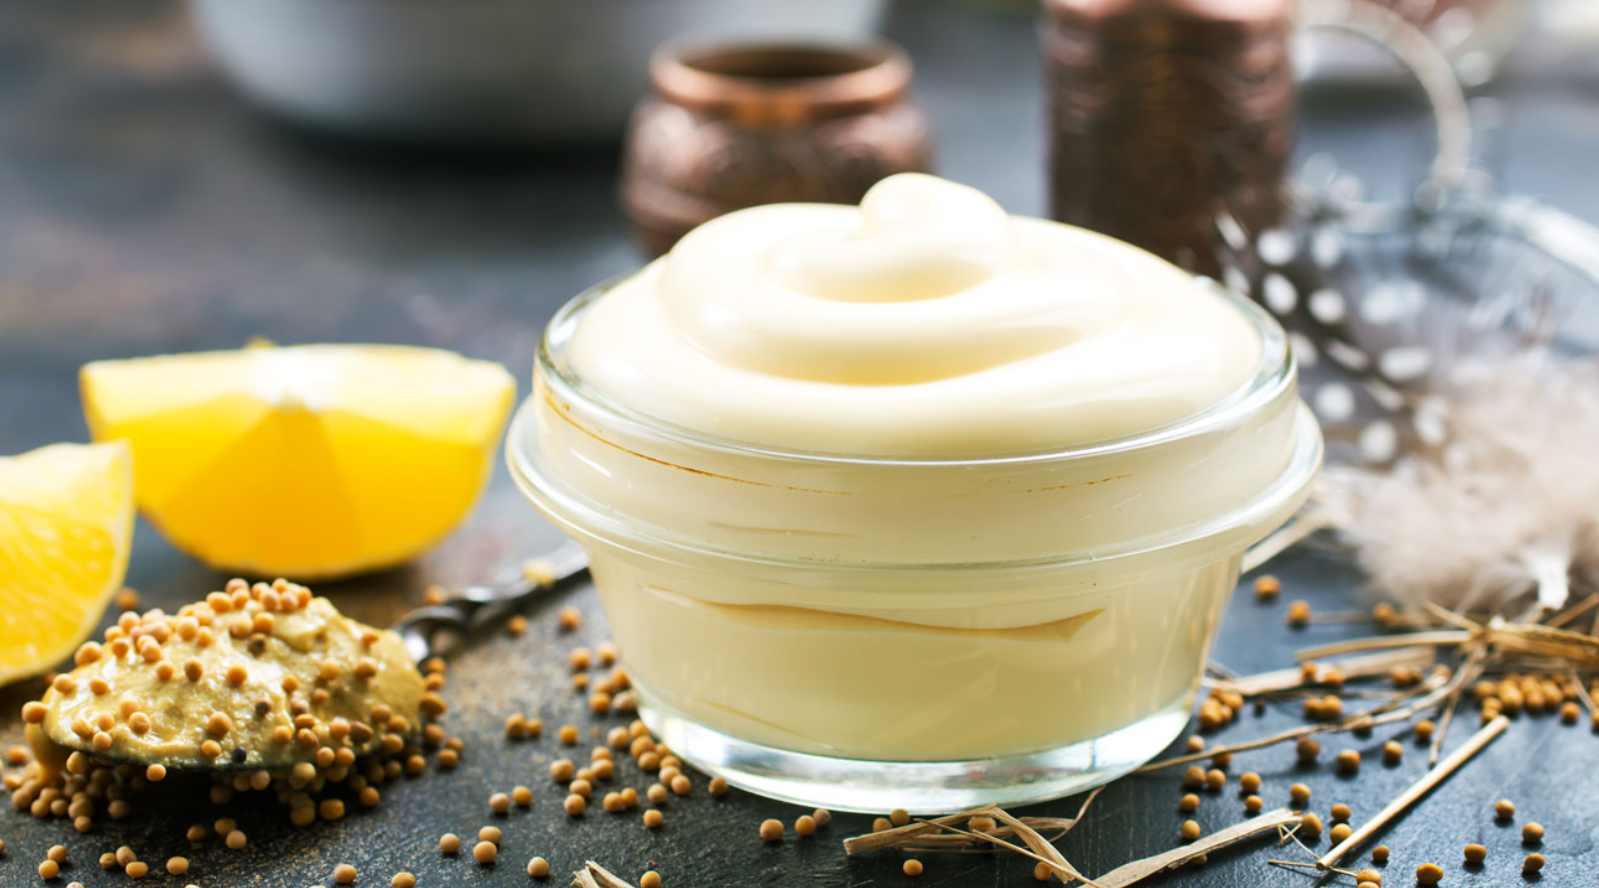 The most delicious homemade mayonnaise